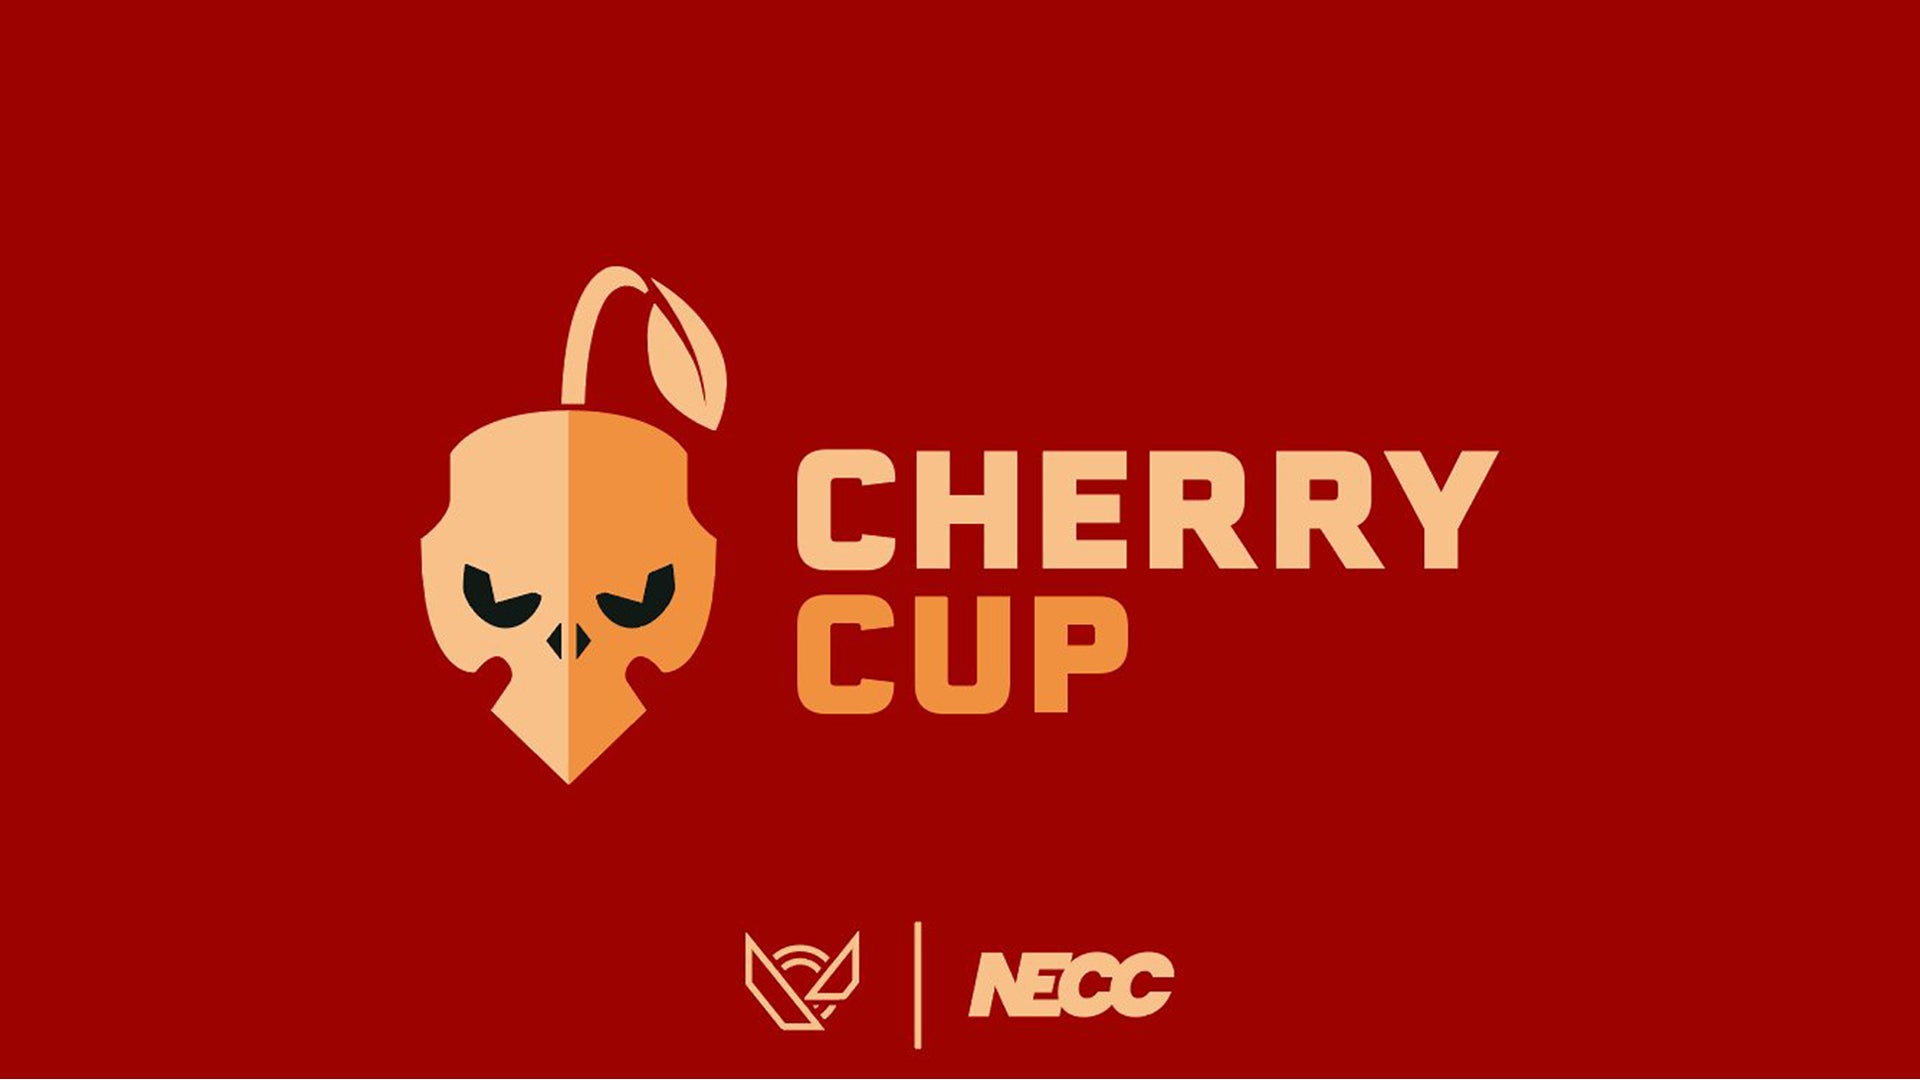 NECC Partners with Collegiate Valorant Hub for Cherry Cup Valorant Charity Tournament